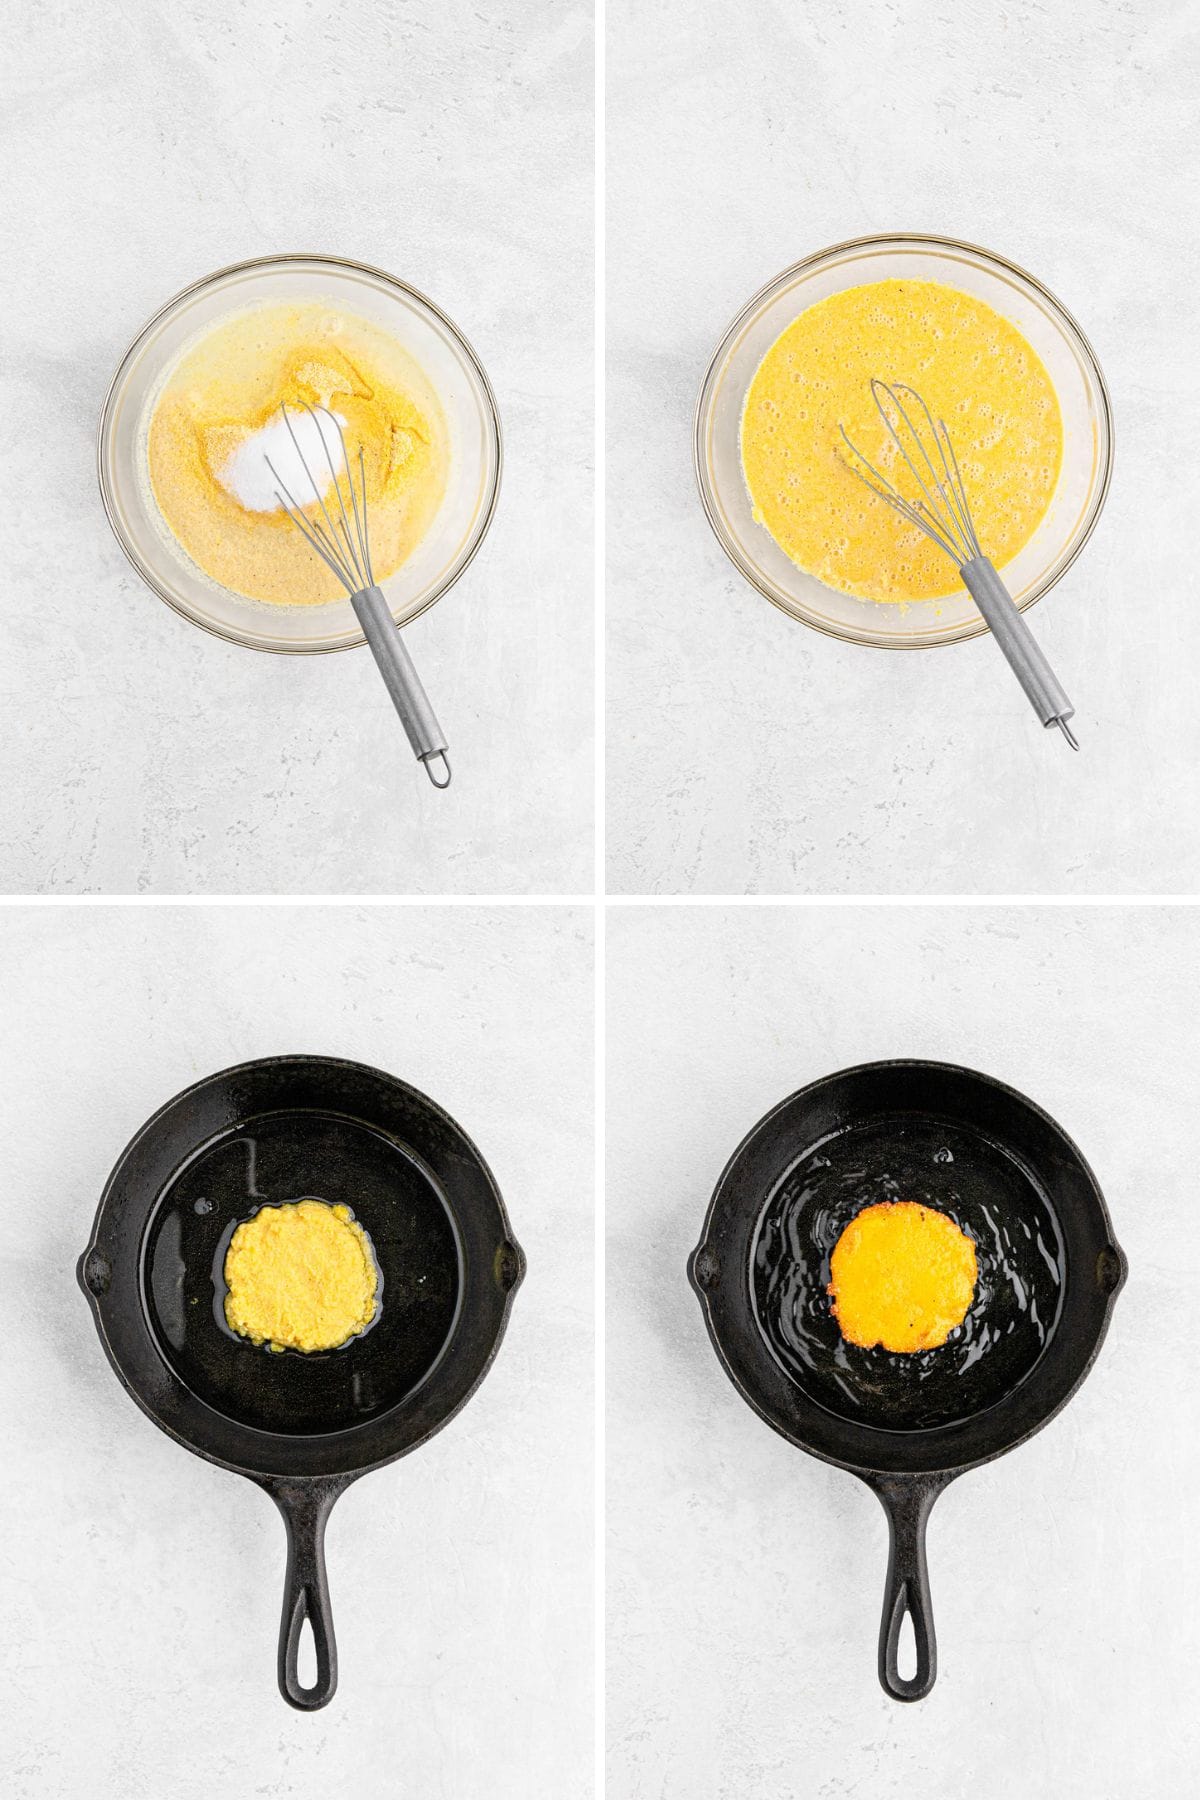 A collage of images showing the preparation of hot water cornbread from mixing the batter and cooking in a skillet.